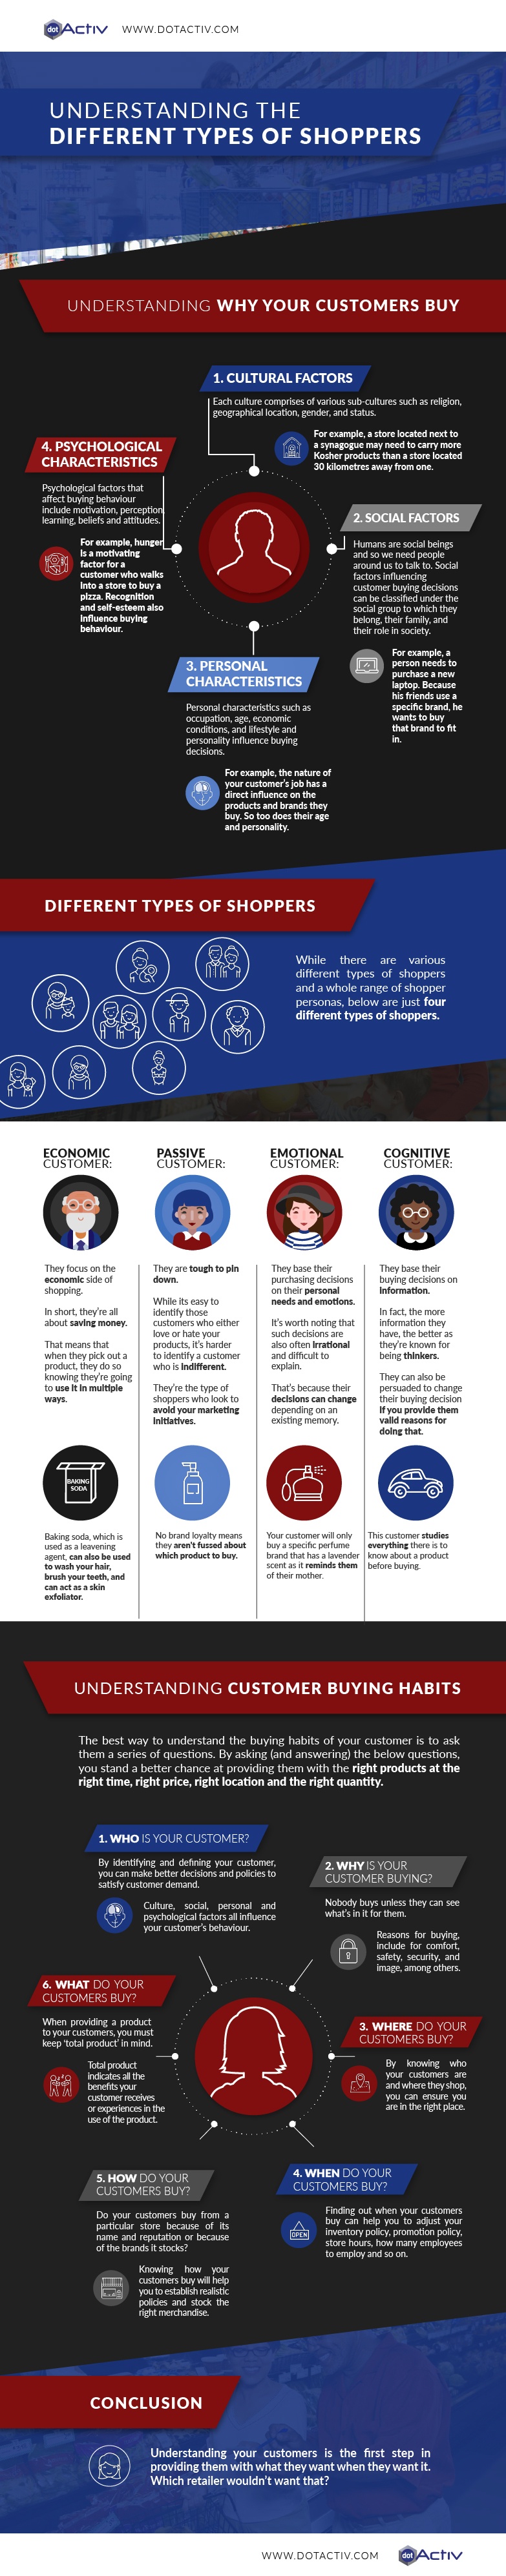 Types of Shoppers Infographic - DotActiv